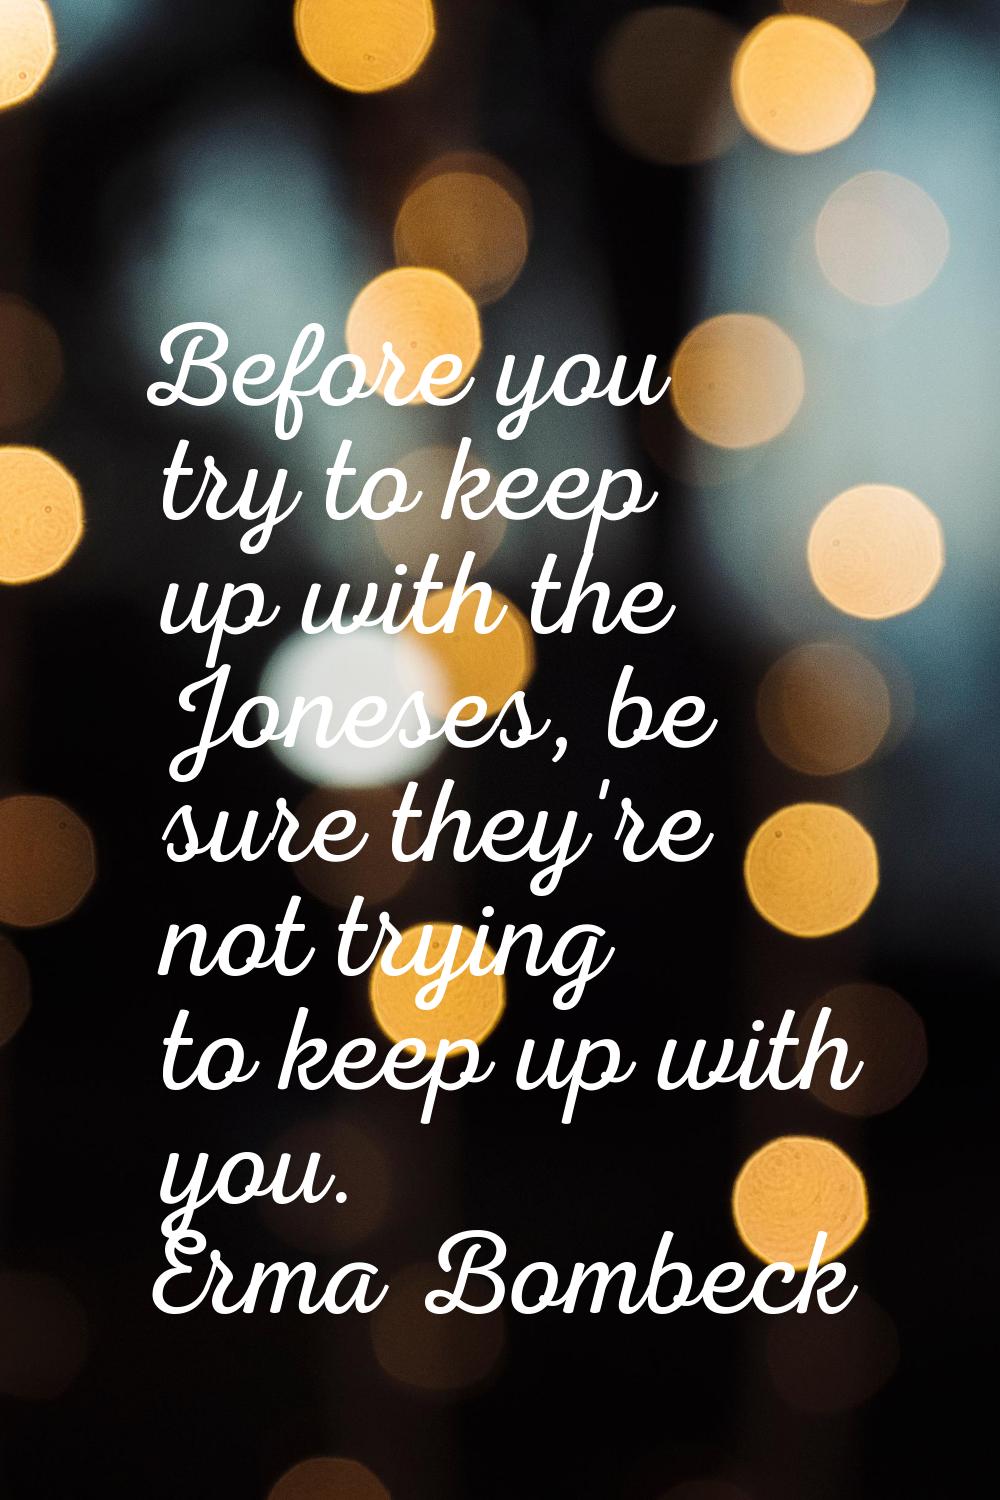 Before you try to keep up with the Joneses, be sure they're not trying to keep up with you.